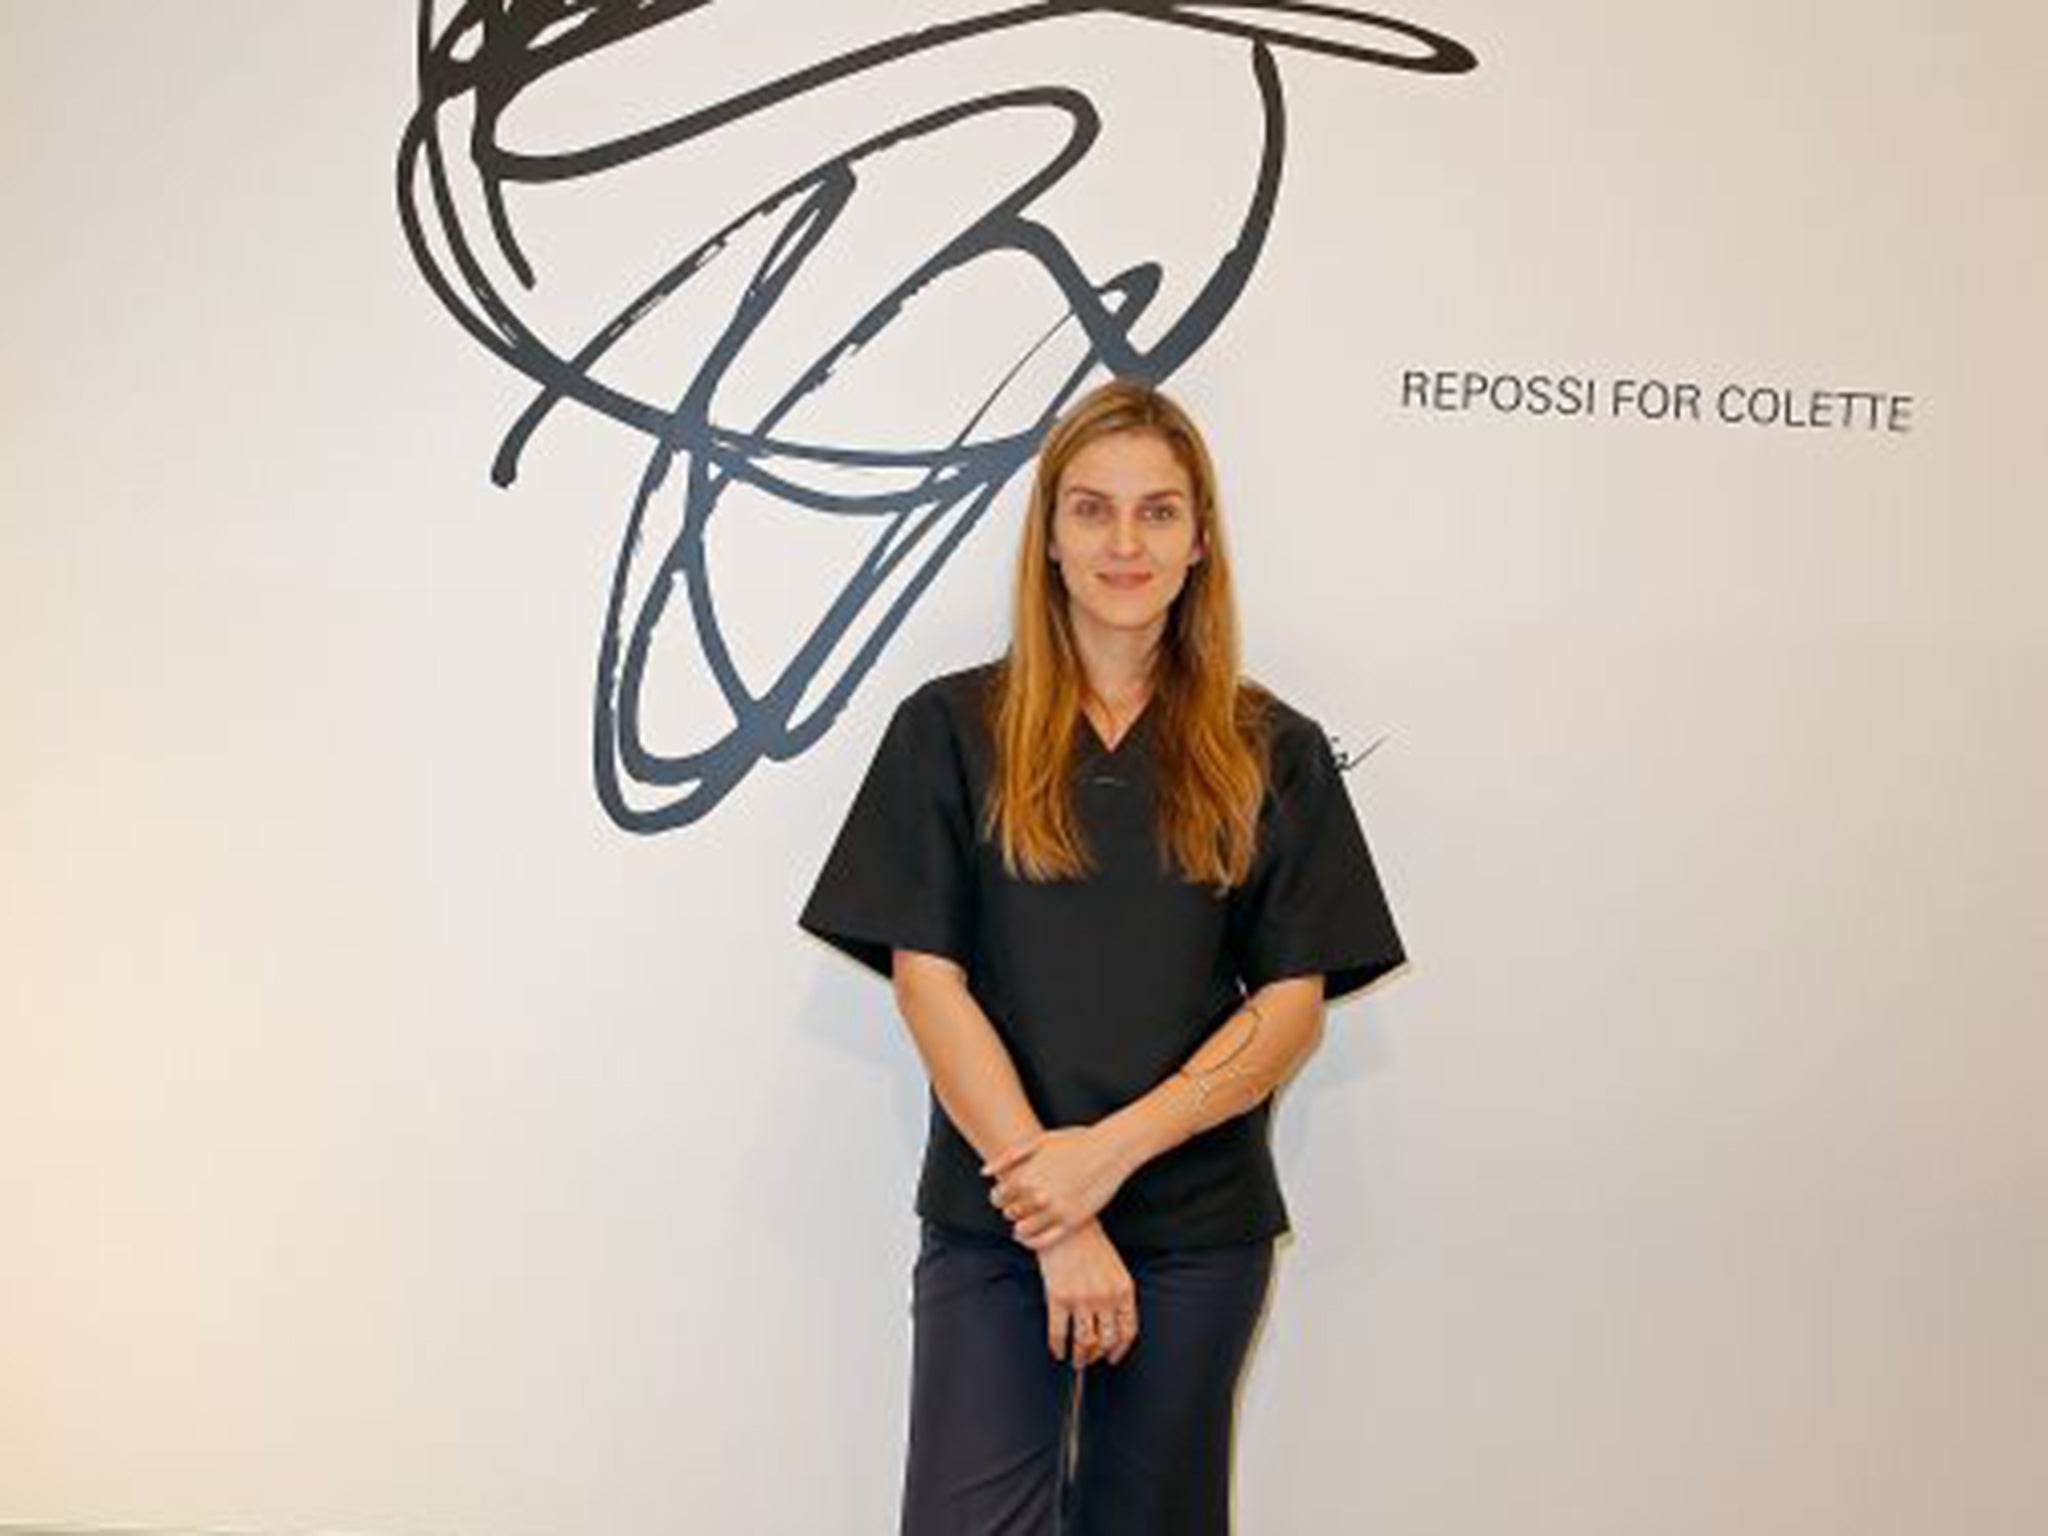 Gaia Repossi is the fourth generation of her family to run the Italian jewellery firm Repossi